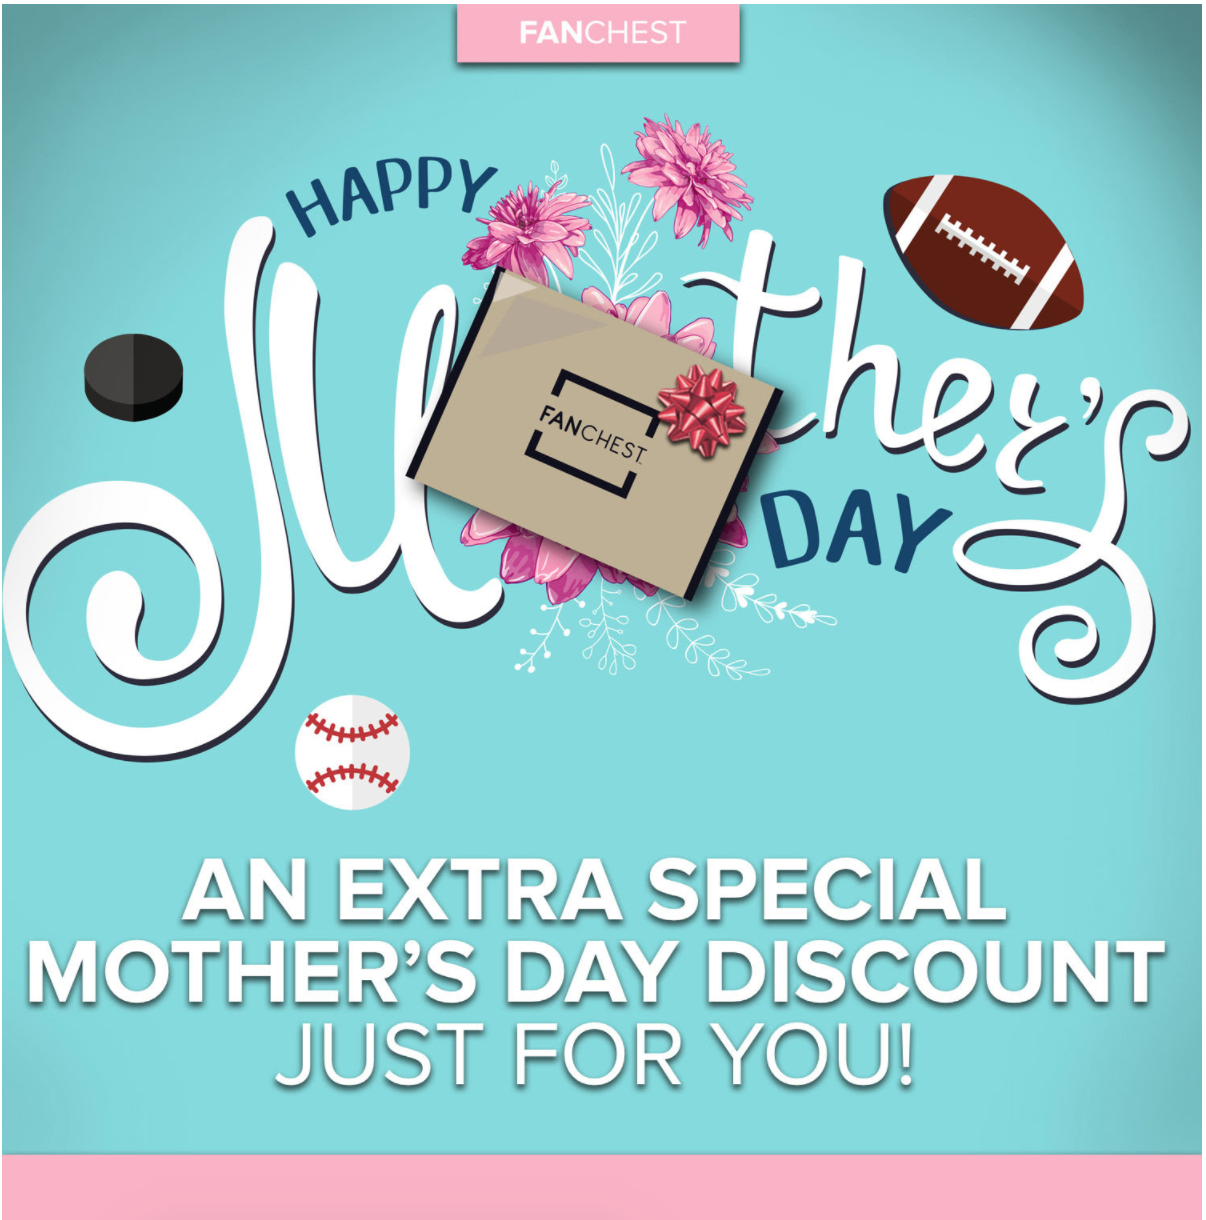 Fanchest Mother’s Day Sale – $10 Off All Franchises!